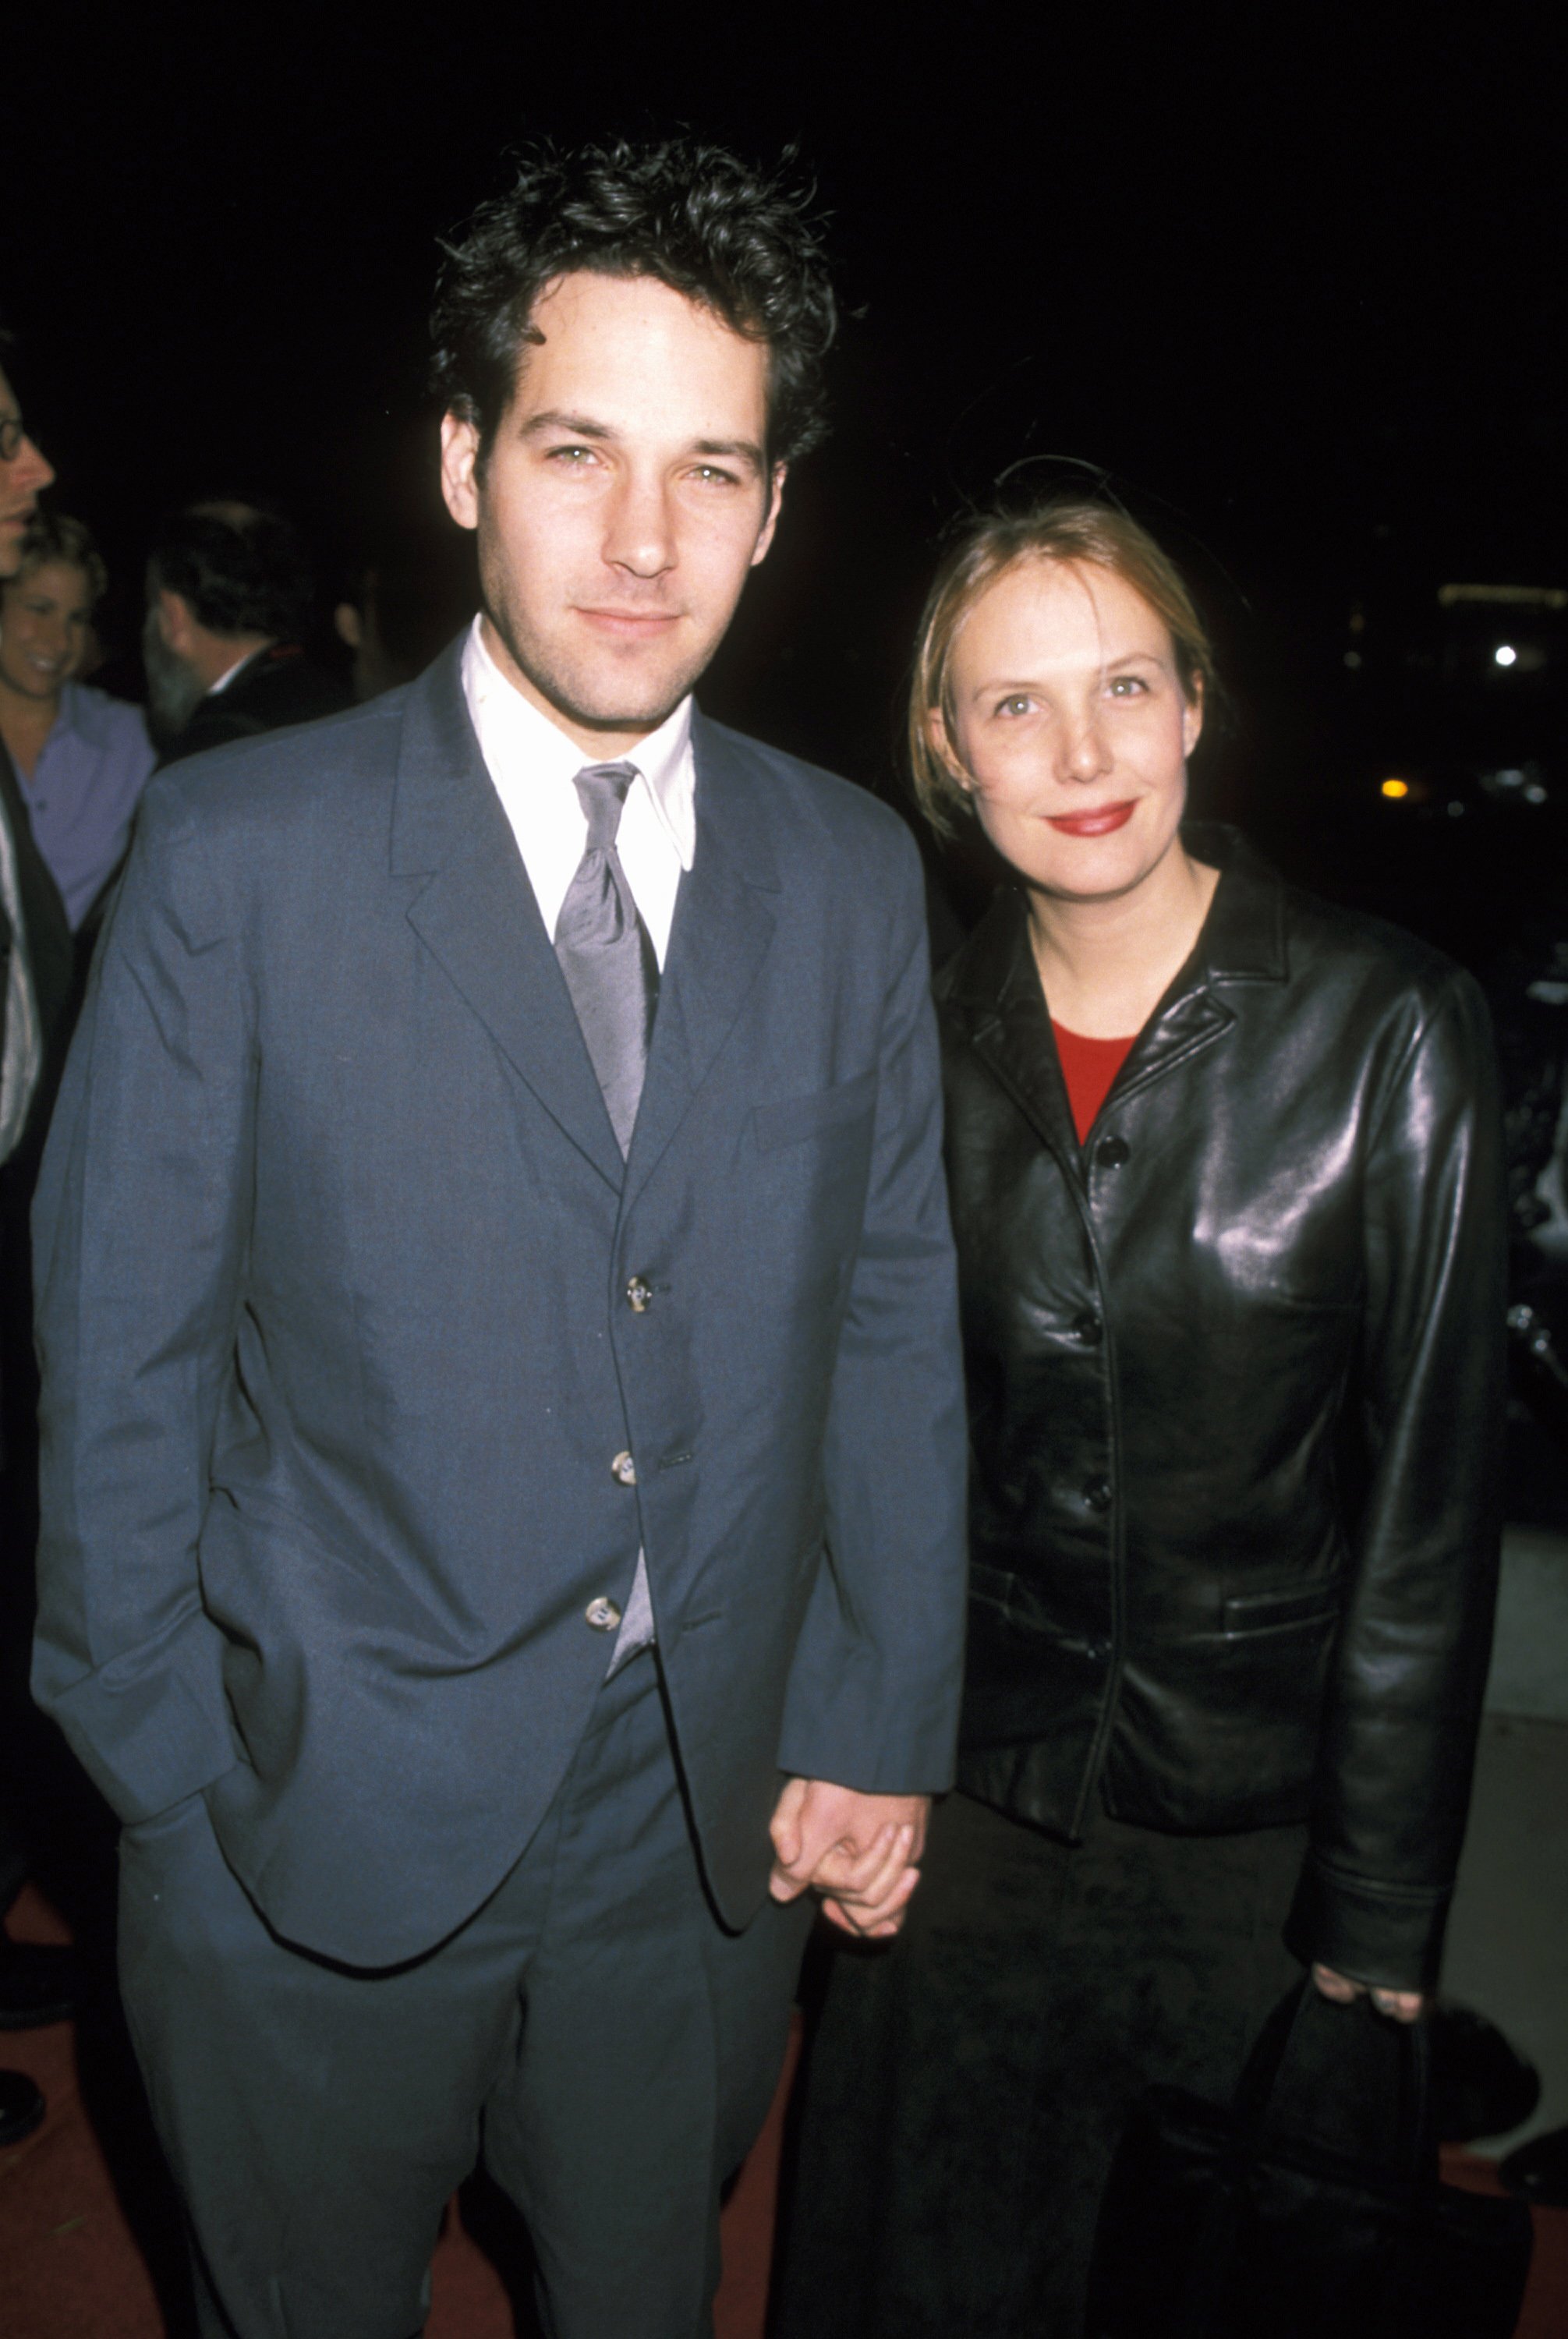  Paul Rudd and Julie Yaeger attend "The Cider House Rules" Beverly Hills Premiere on December 7, 1999, in Beverly Hills, California. | Source: Getty Images